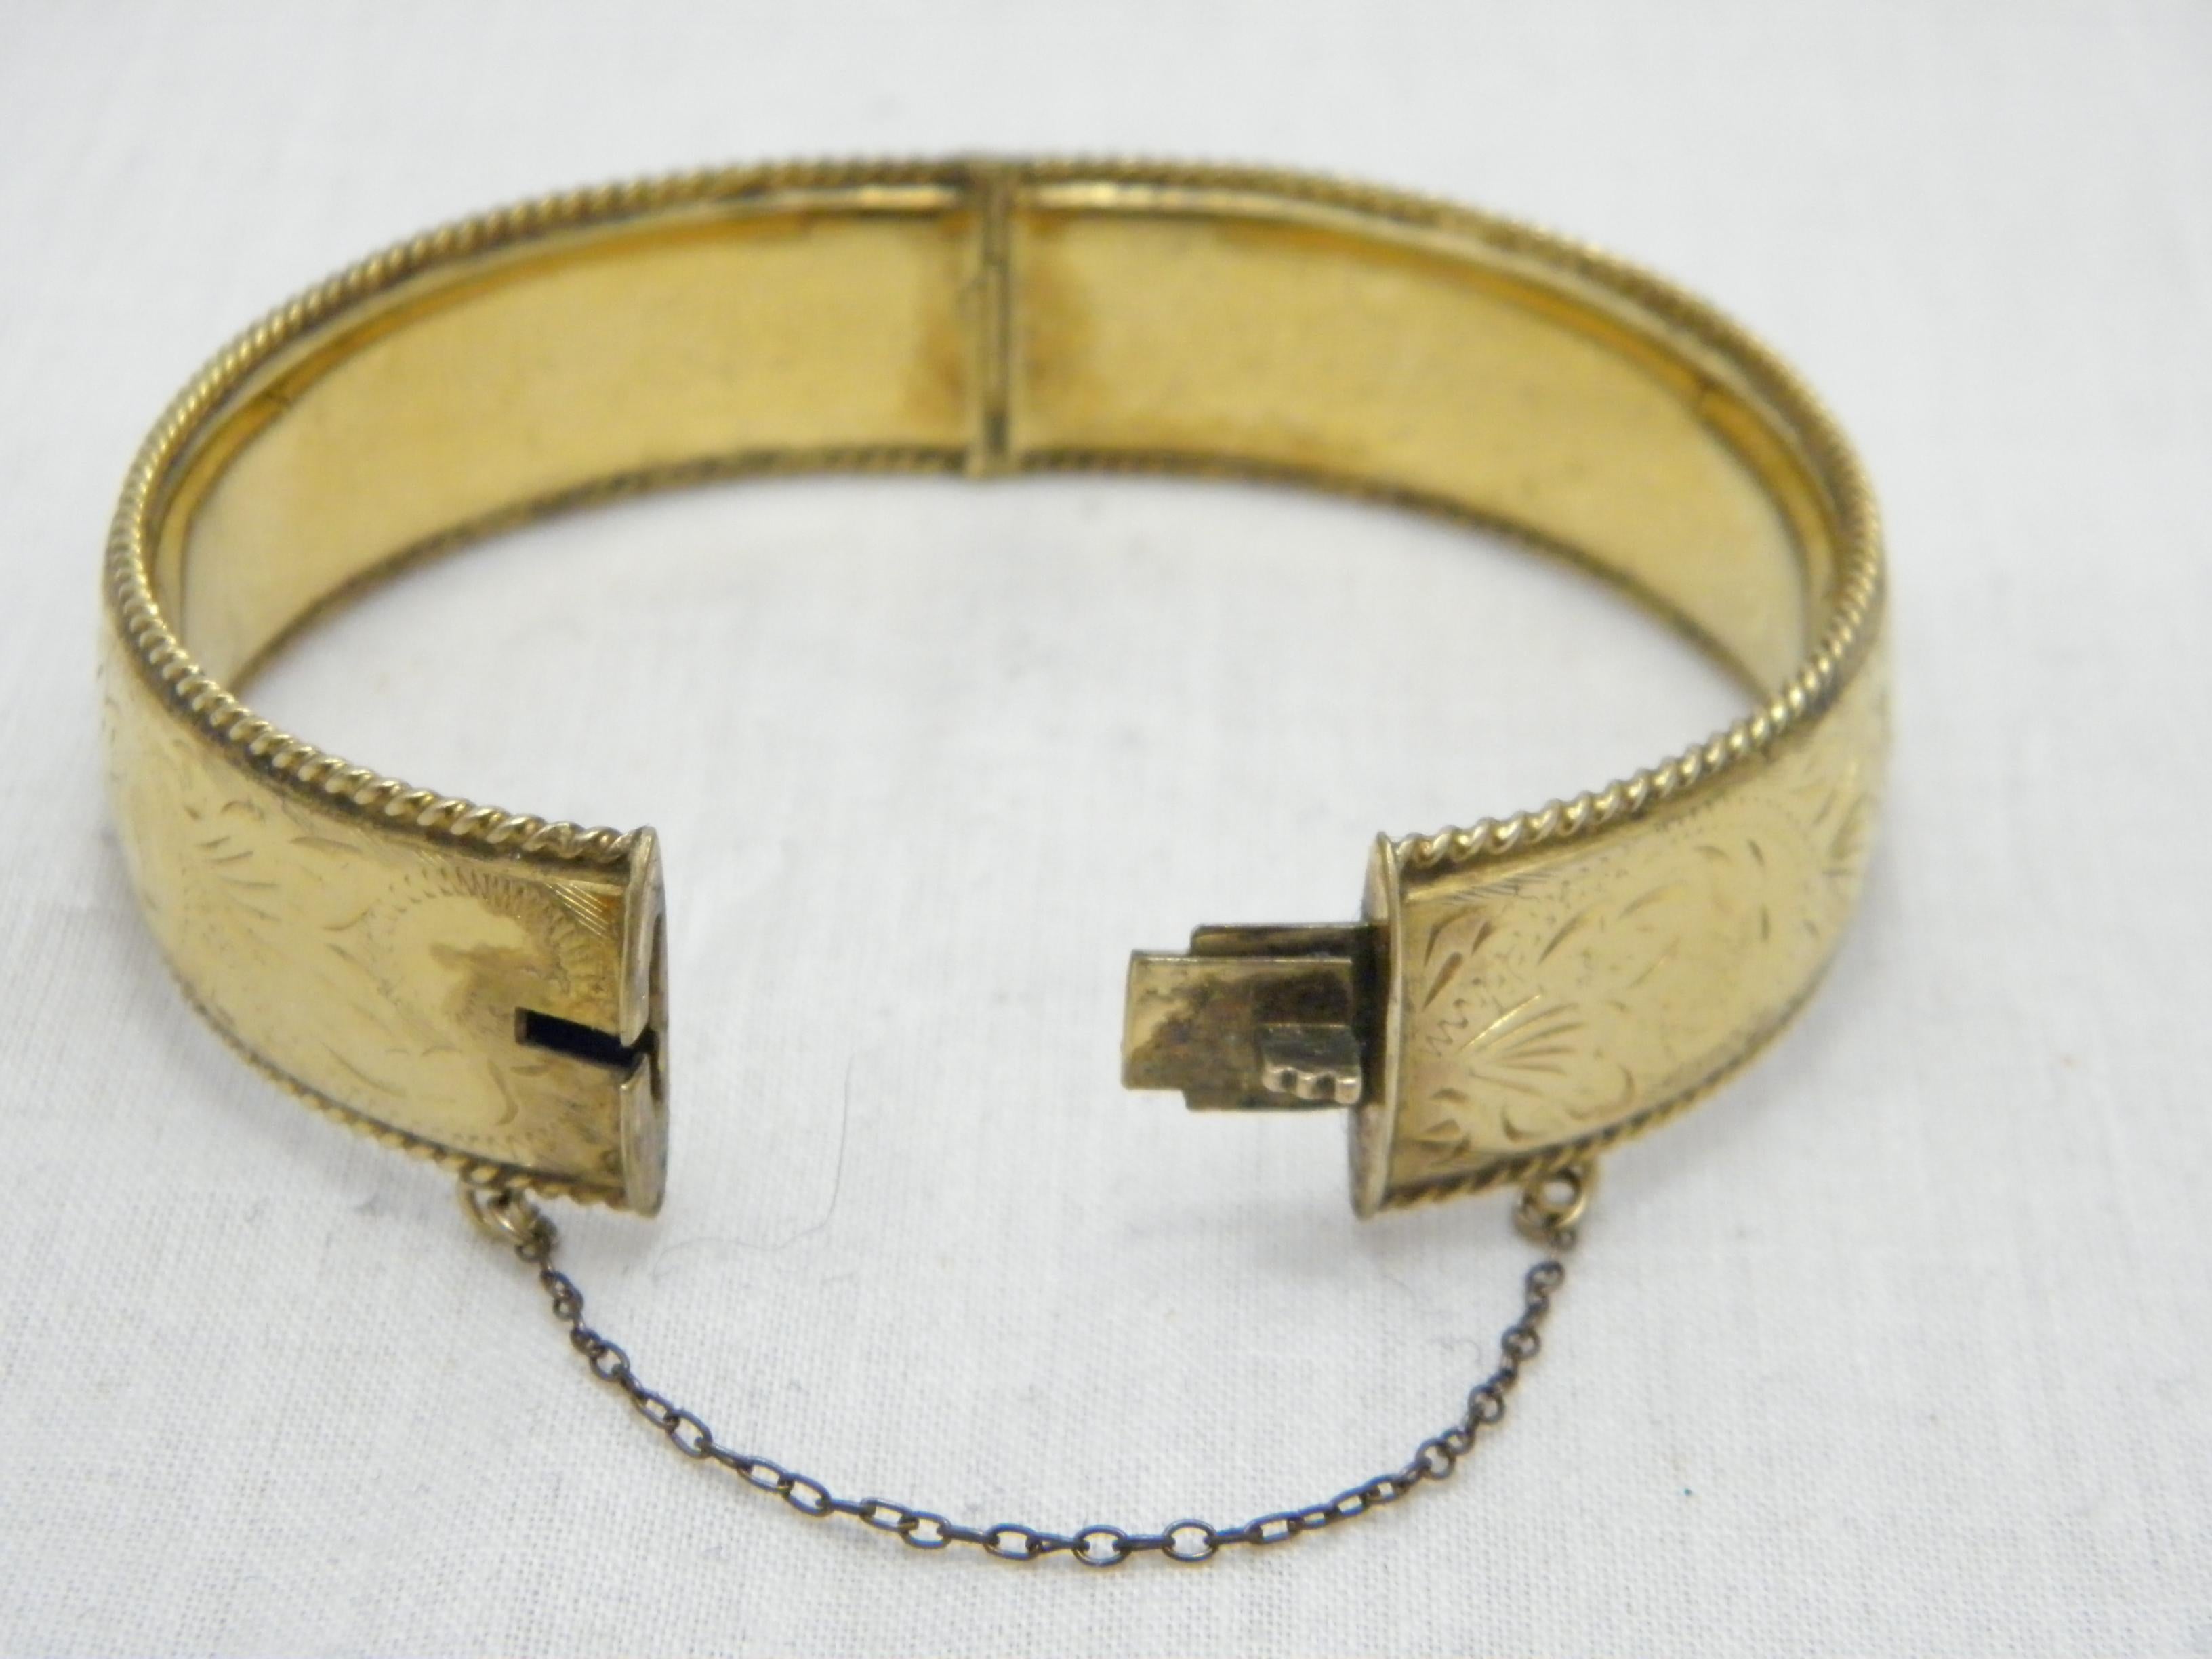 Vintage 9ct Gold 'Rolled' Floral Engraved Cuff Hinged Bracelet Bangle 375 Purity In Good Condition For Sale In Camelford, GB